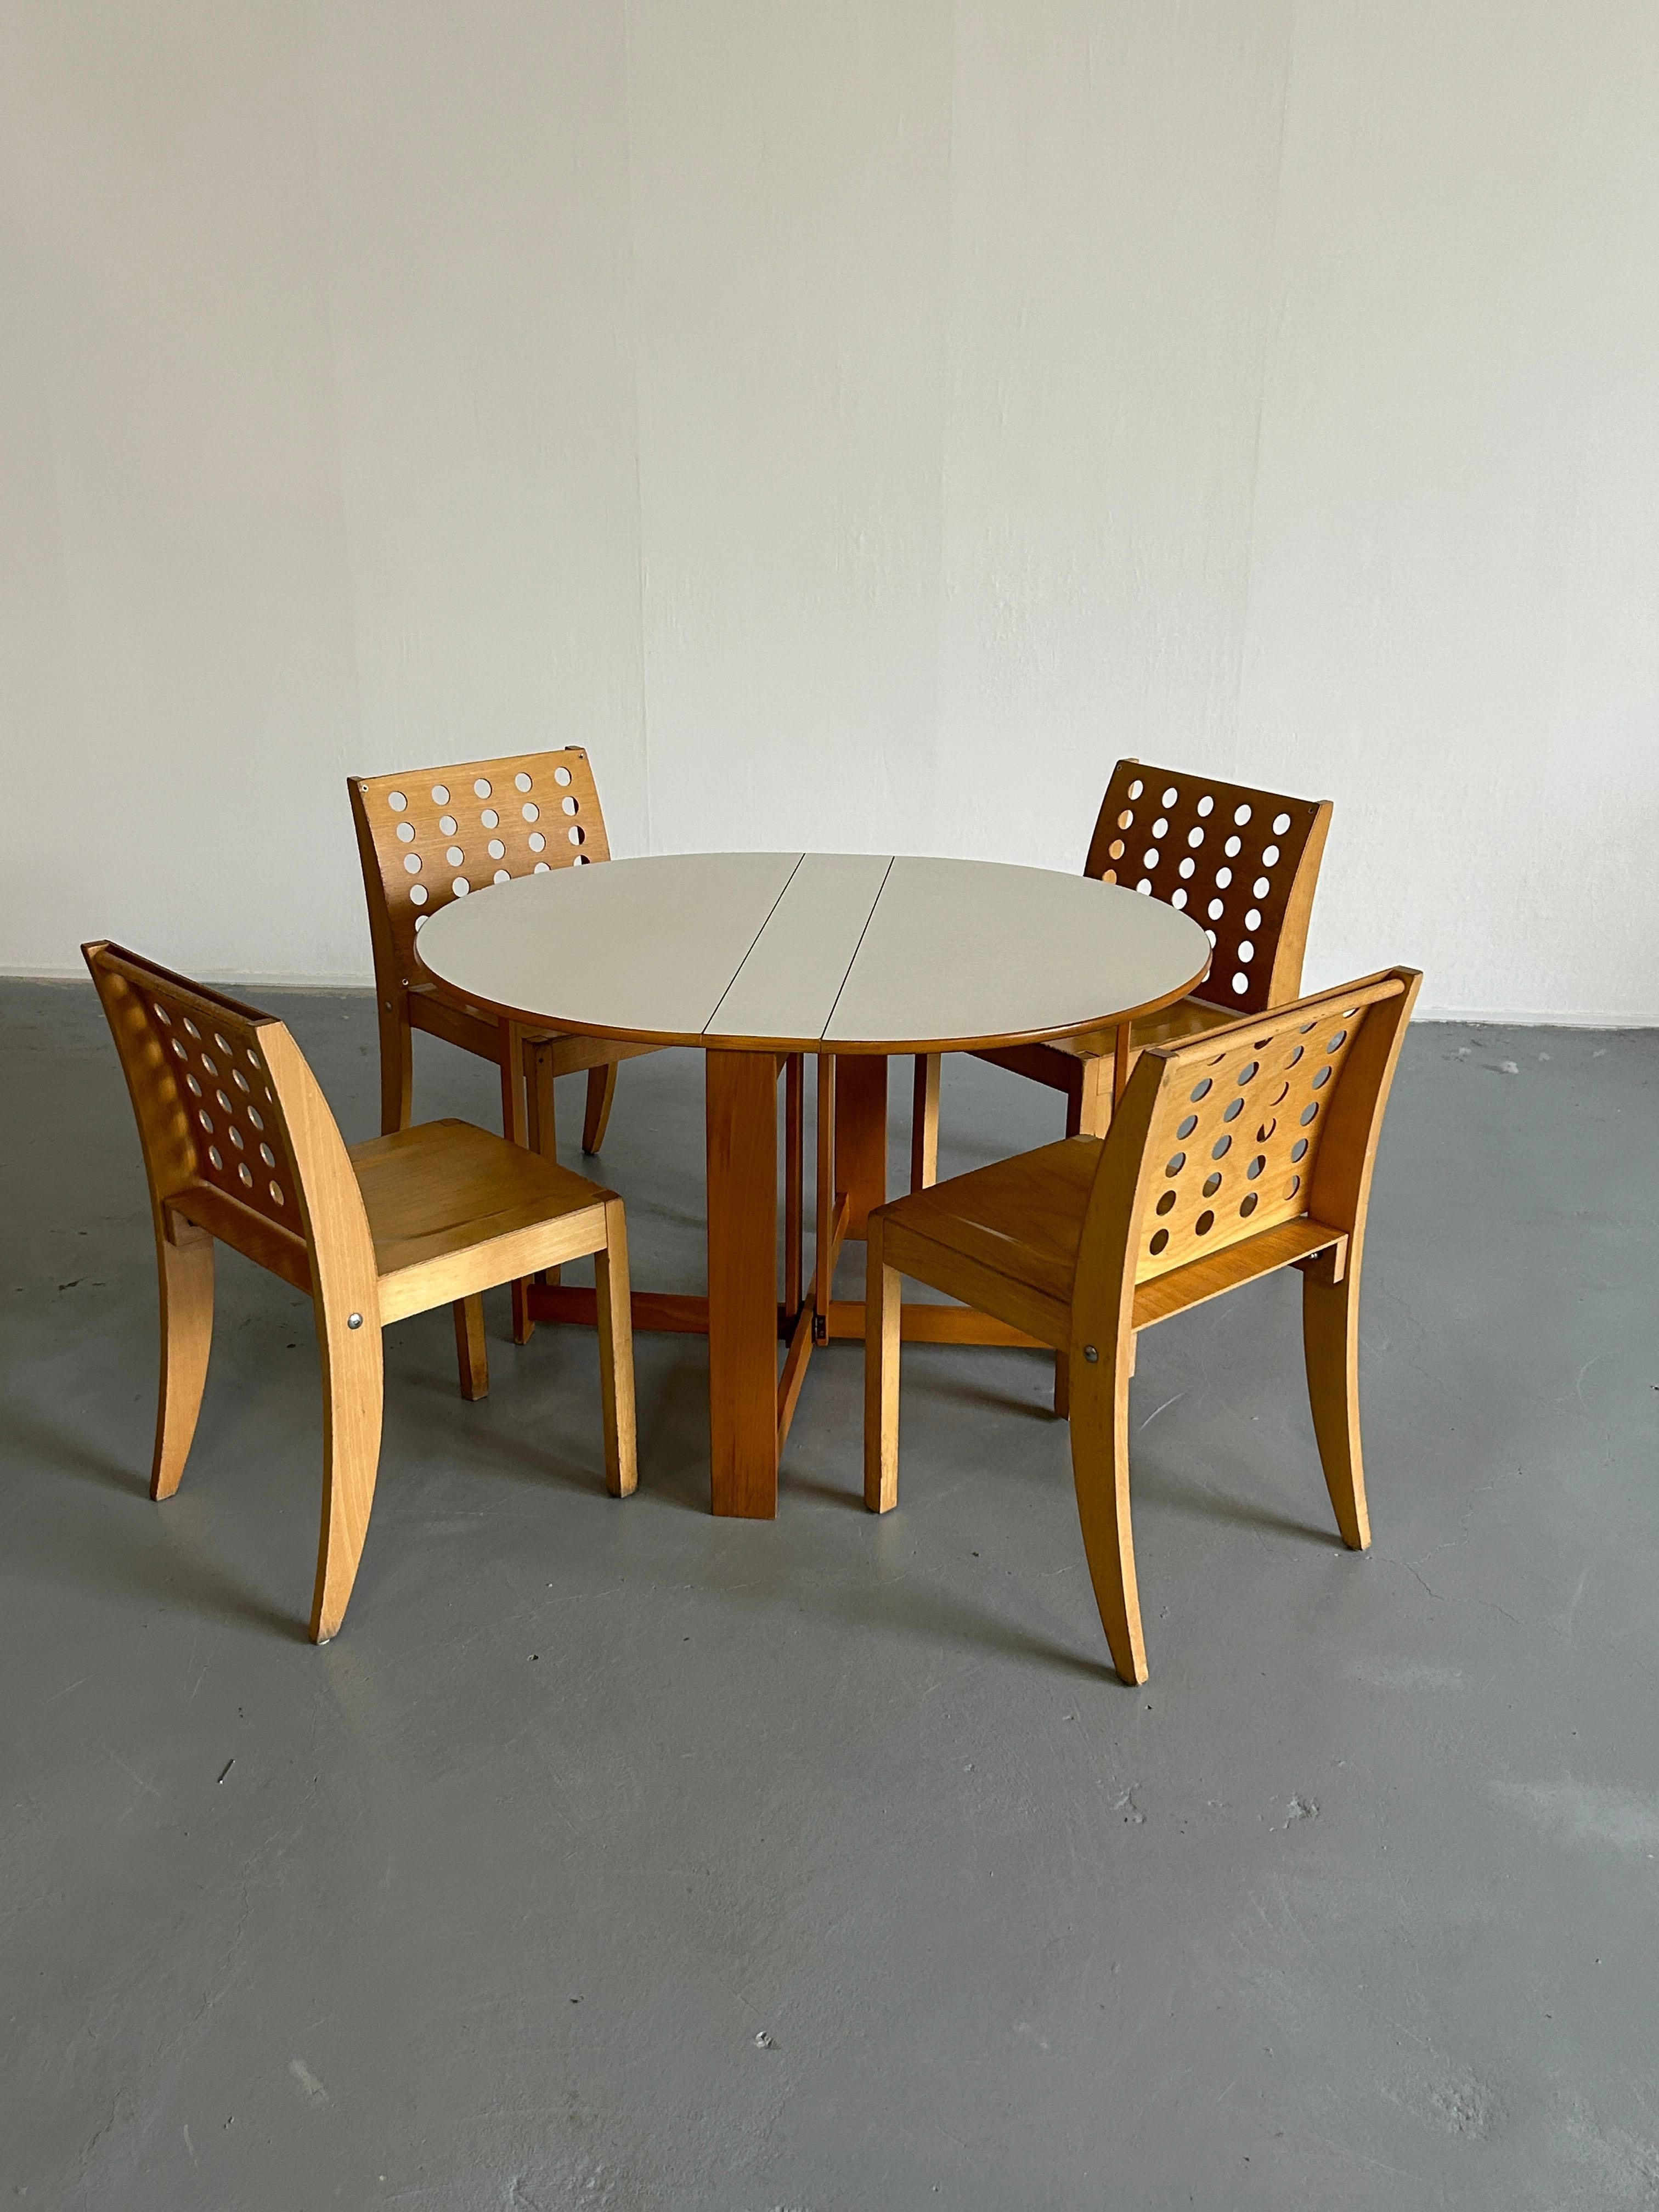 Late 20th Century Set of 4 Vintage Thonet S471 Mid-Century-Modern Chairs by Christoph Zschocke